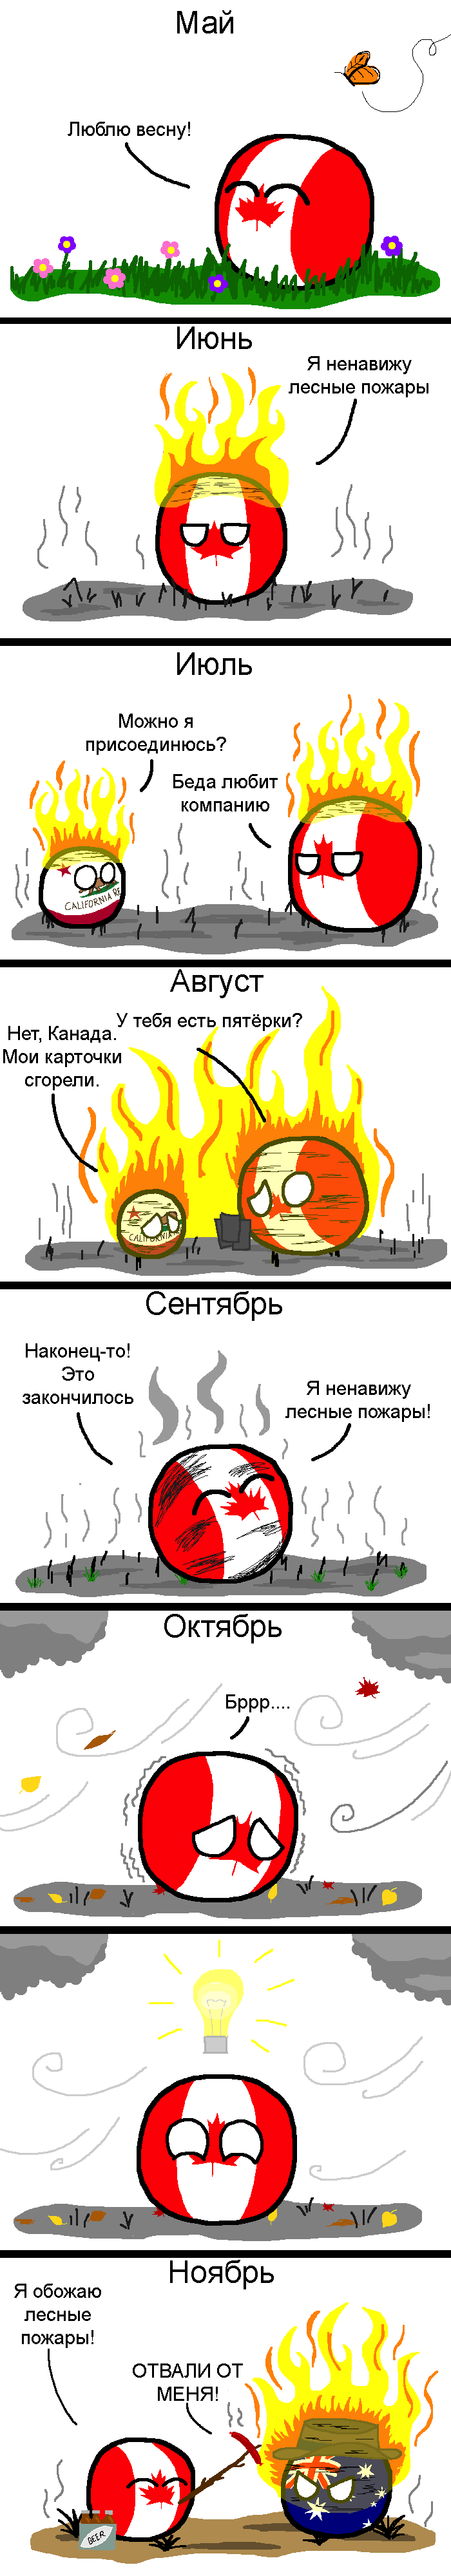 Forest fires - Countryballs, Comics, Translated by myself, Forest fires, Canada, Australia, California, Longpost